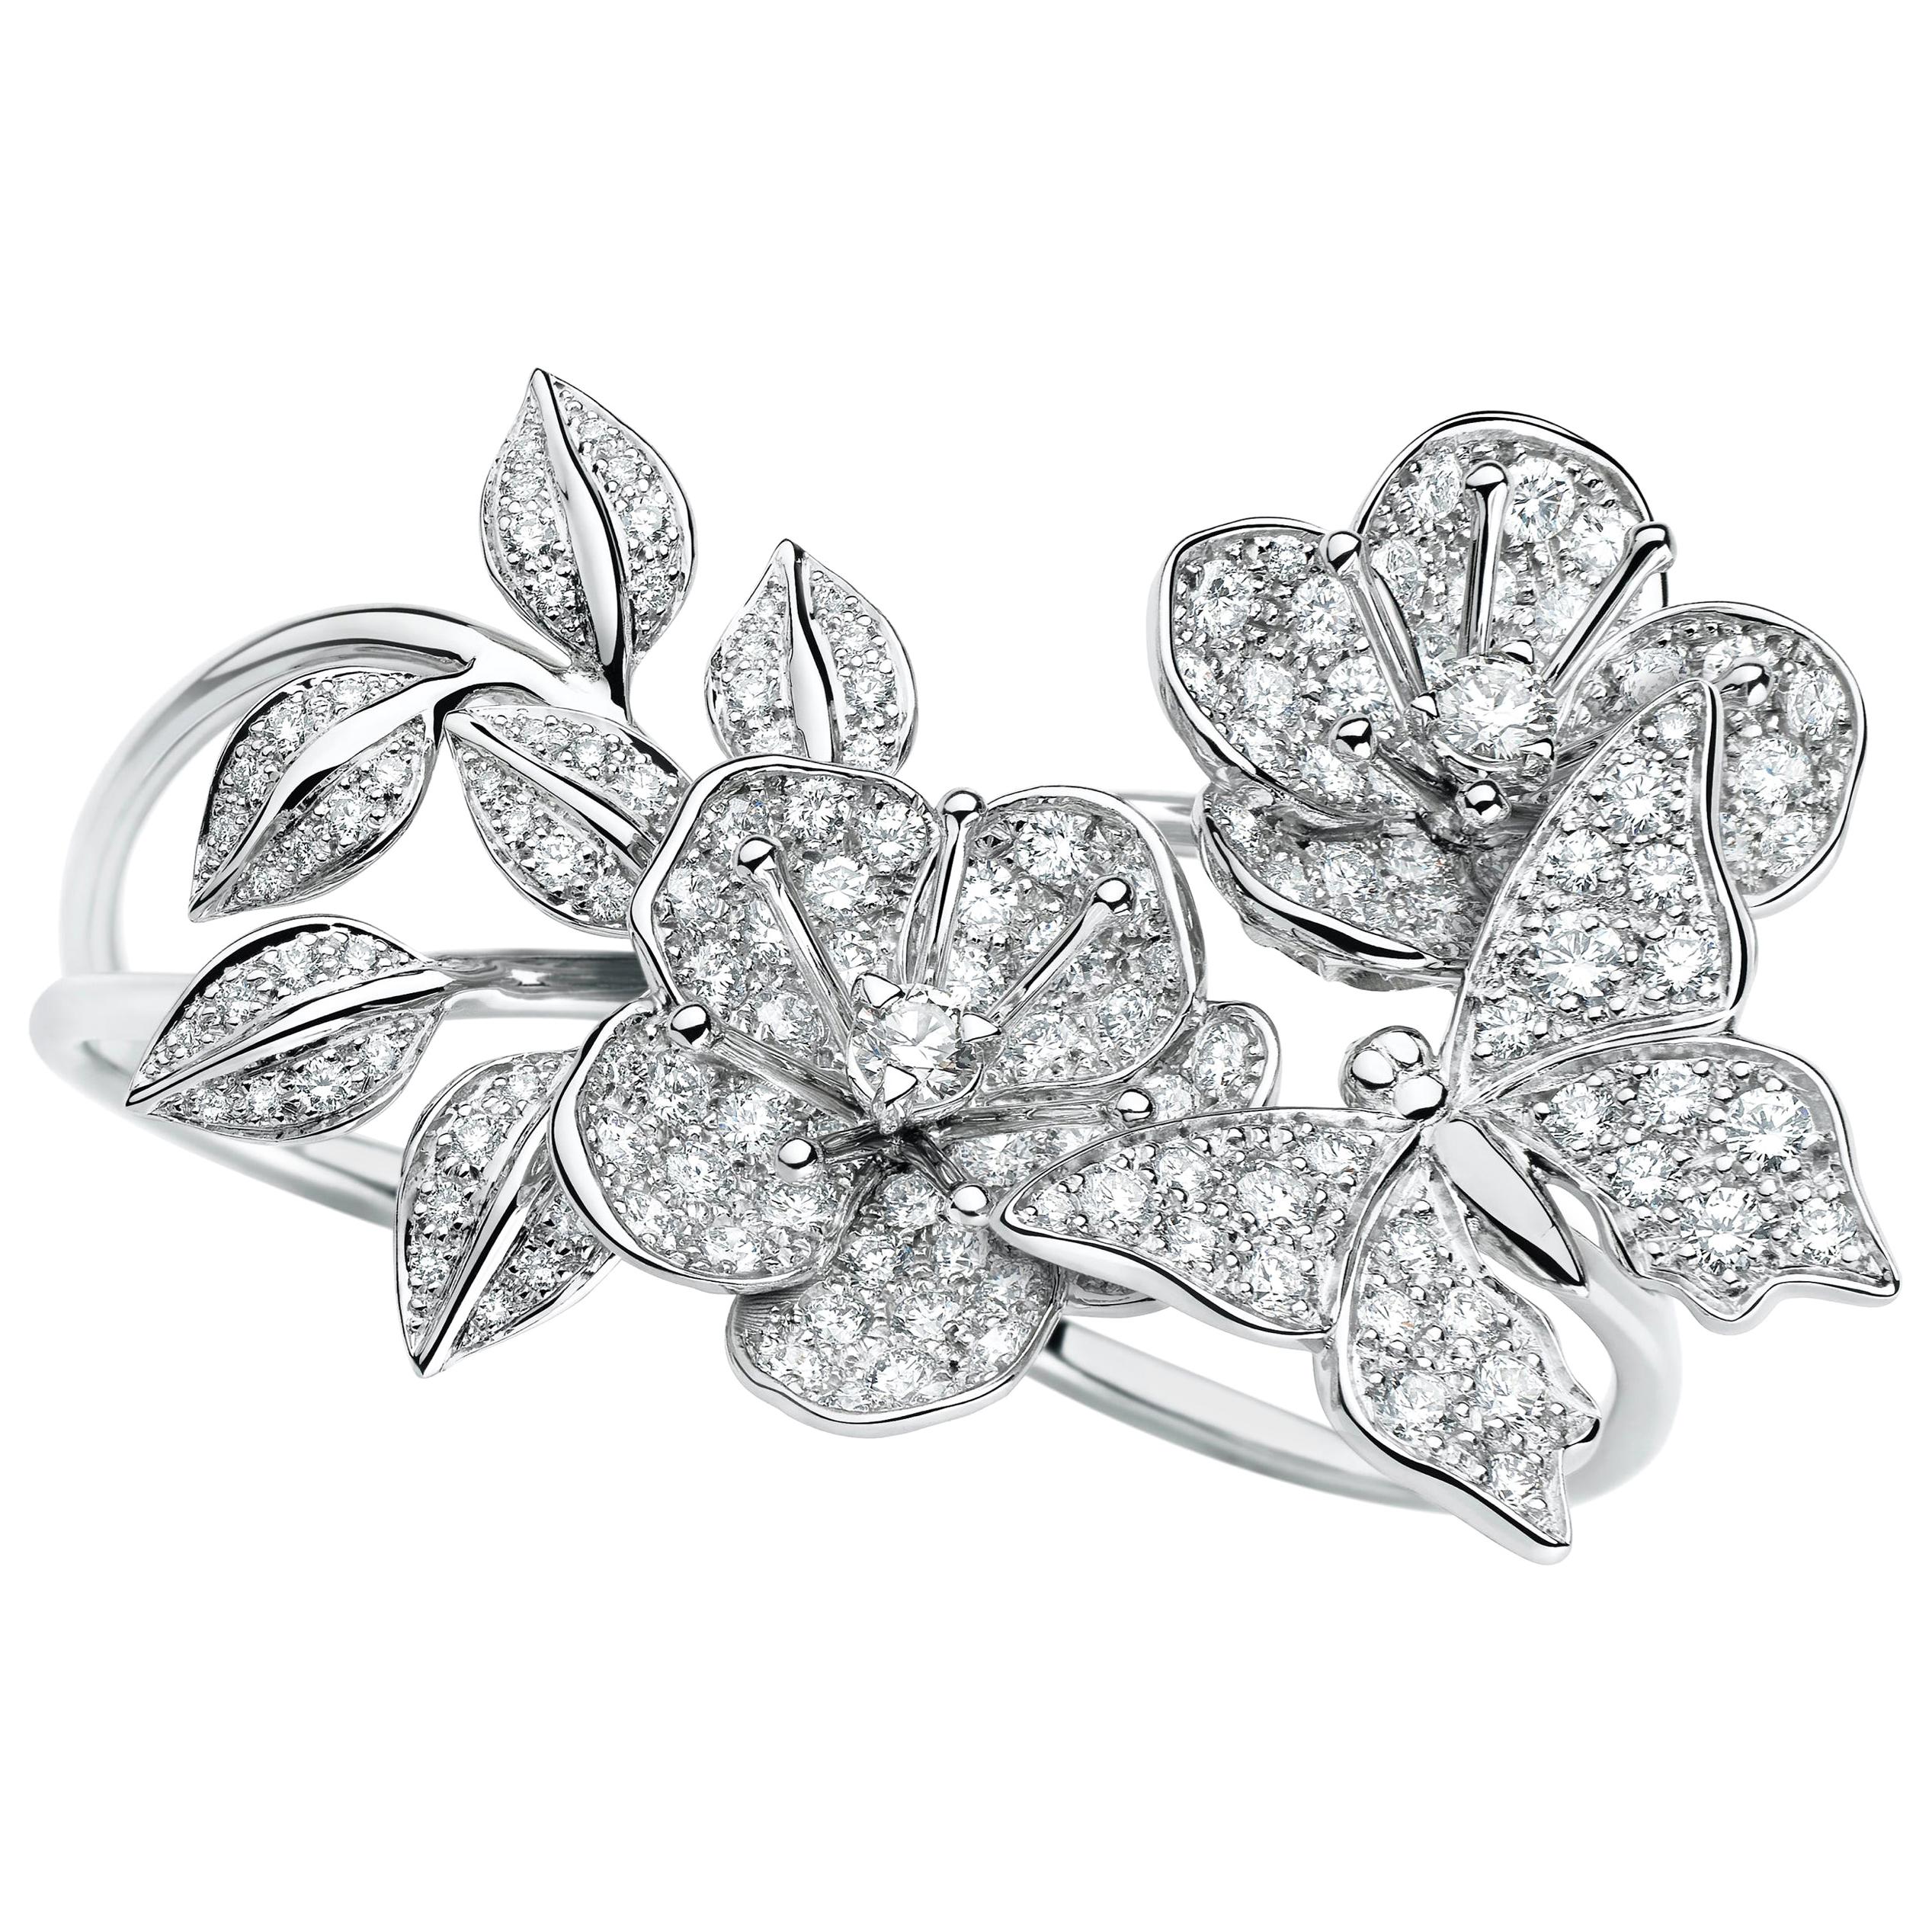 Butterflies and Blossom Ring in Diamonds and 18K White Gold by Édéenne, Paris For Sale